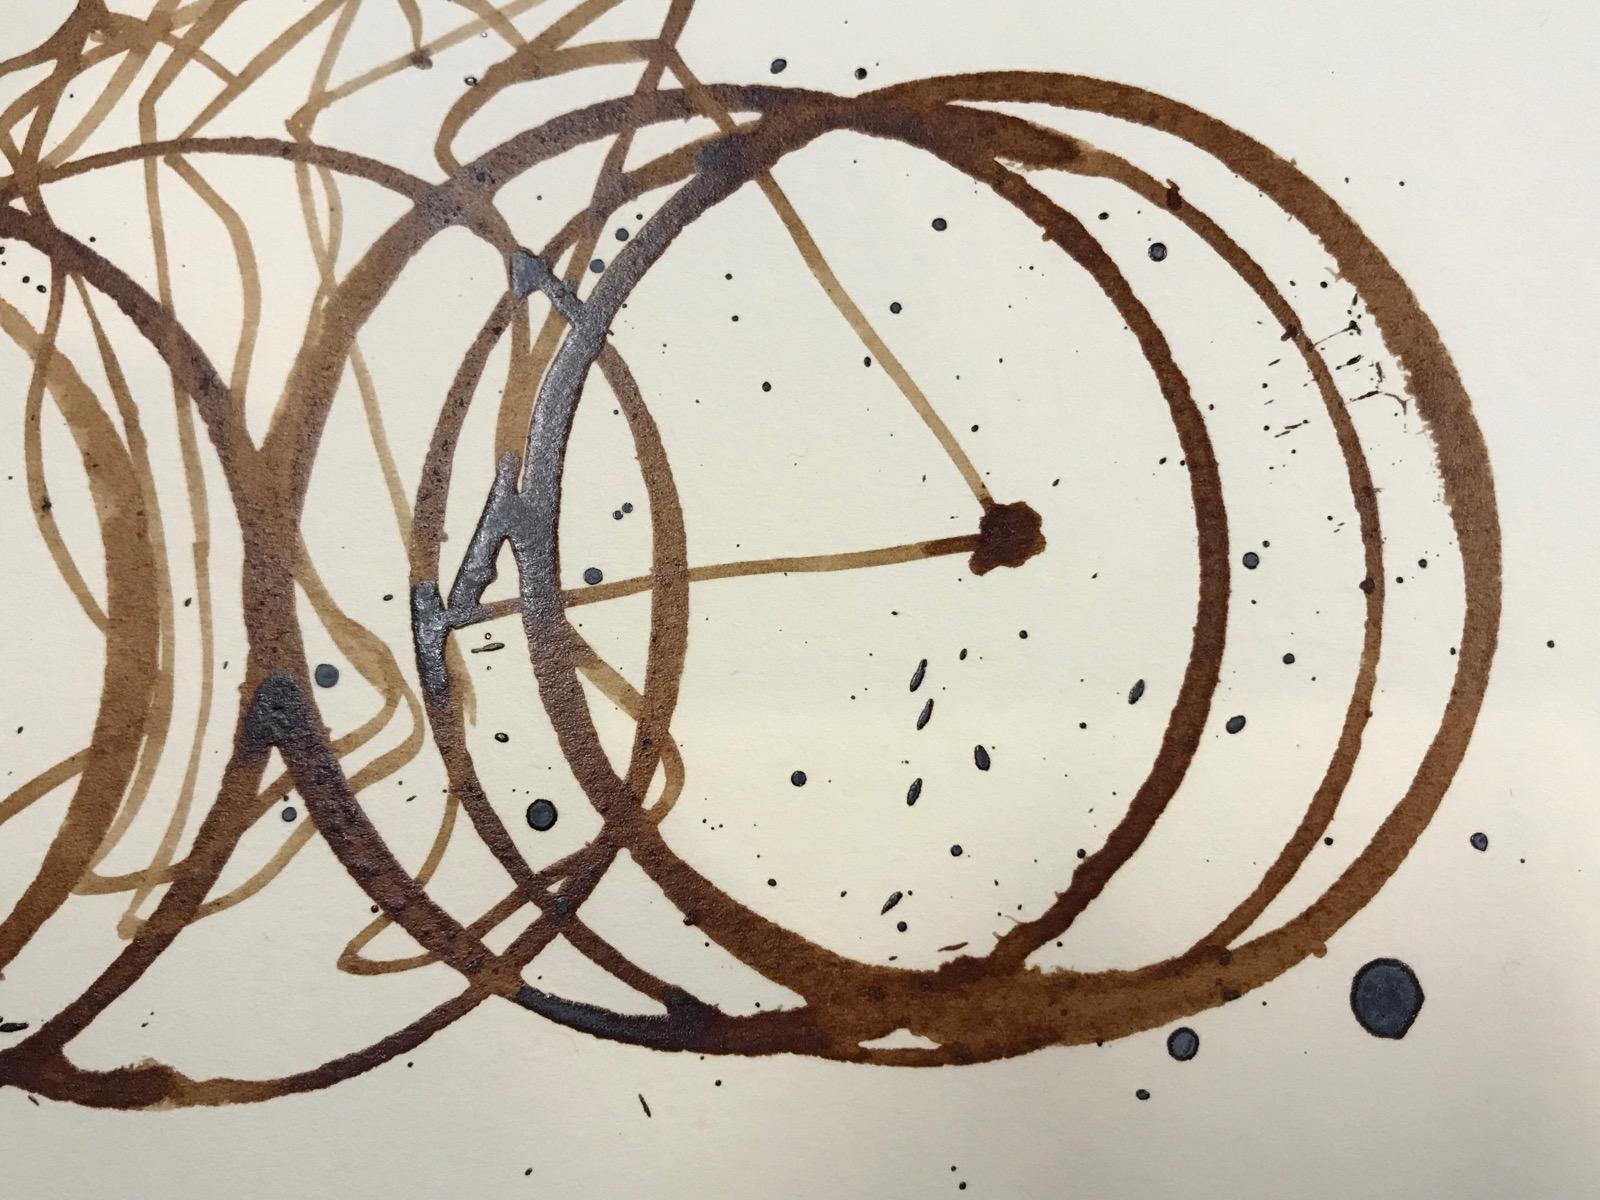 Original Artwork by Eliza Southwood made from specially treated coffee and then submitted to a further setting treatment.

Additional  information:
Eliza Southwood
Coffee on paper
Sold unframed 
Image size ( dimentions of the cyclists): 
Height: